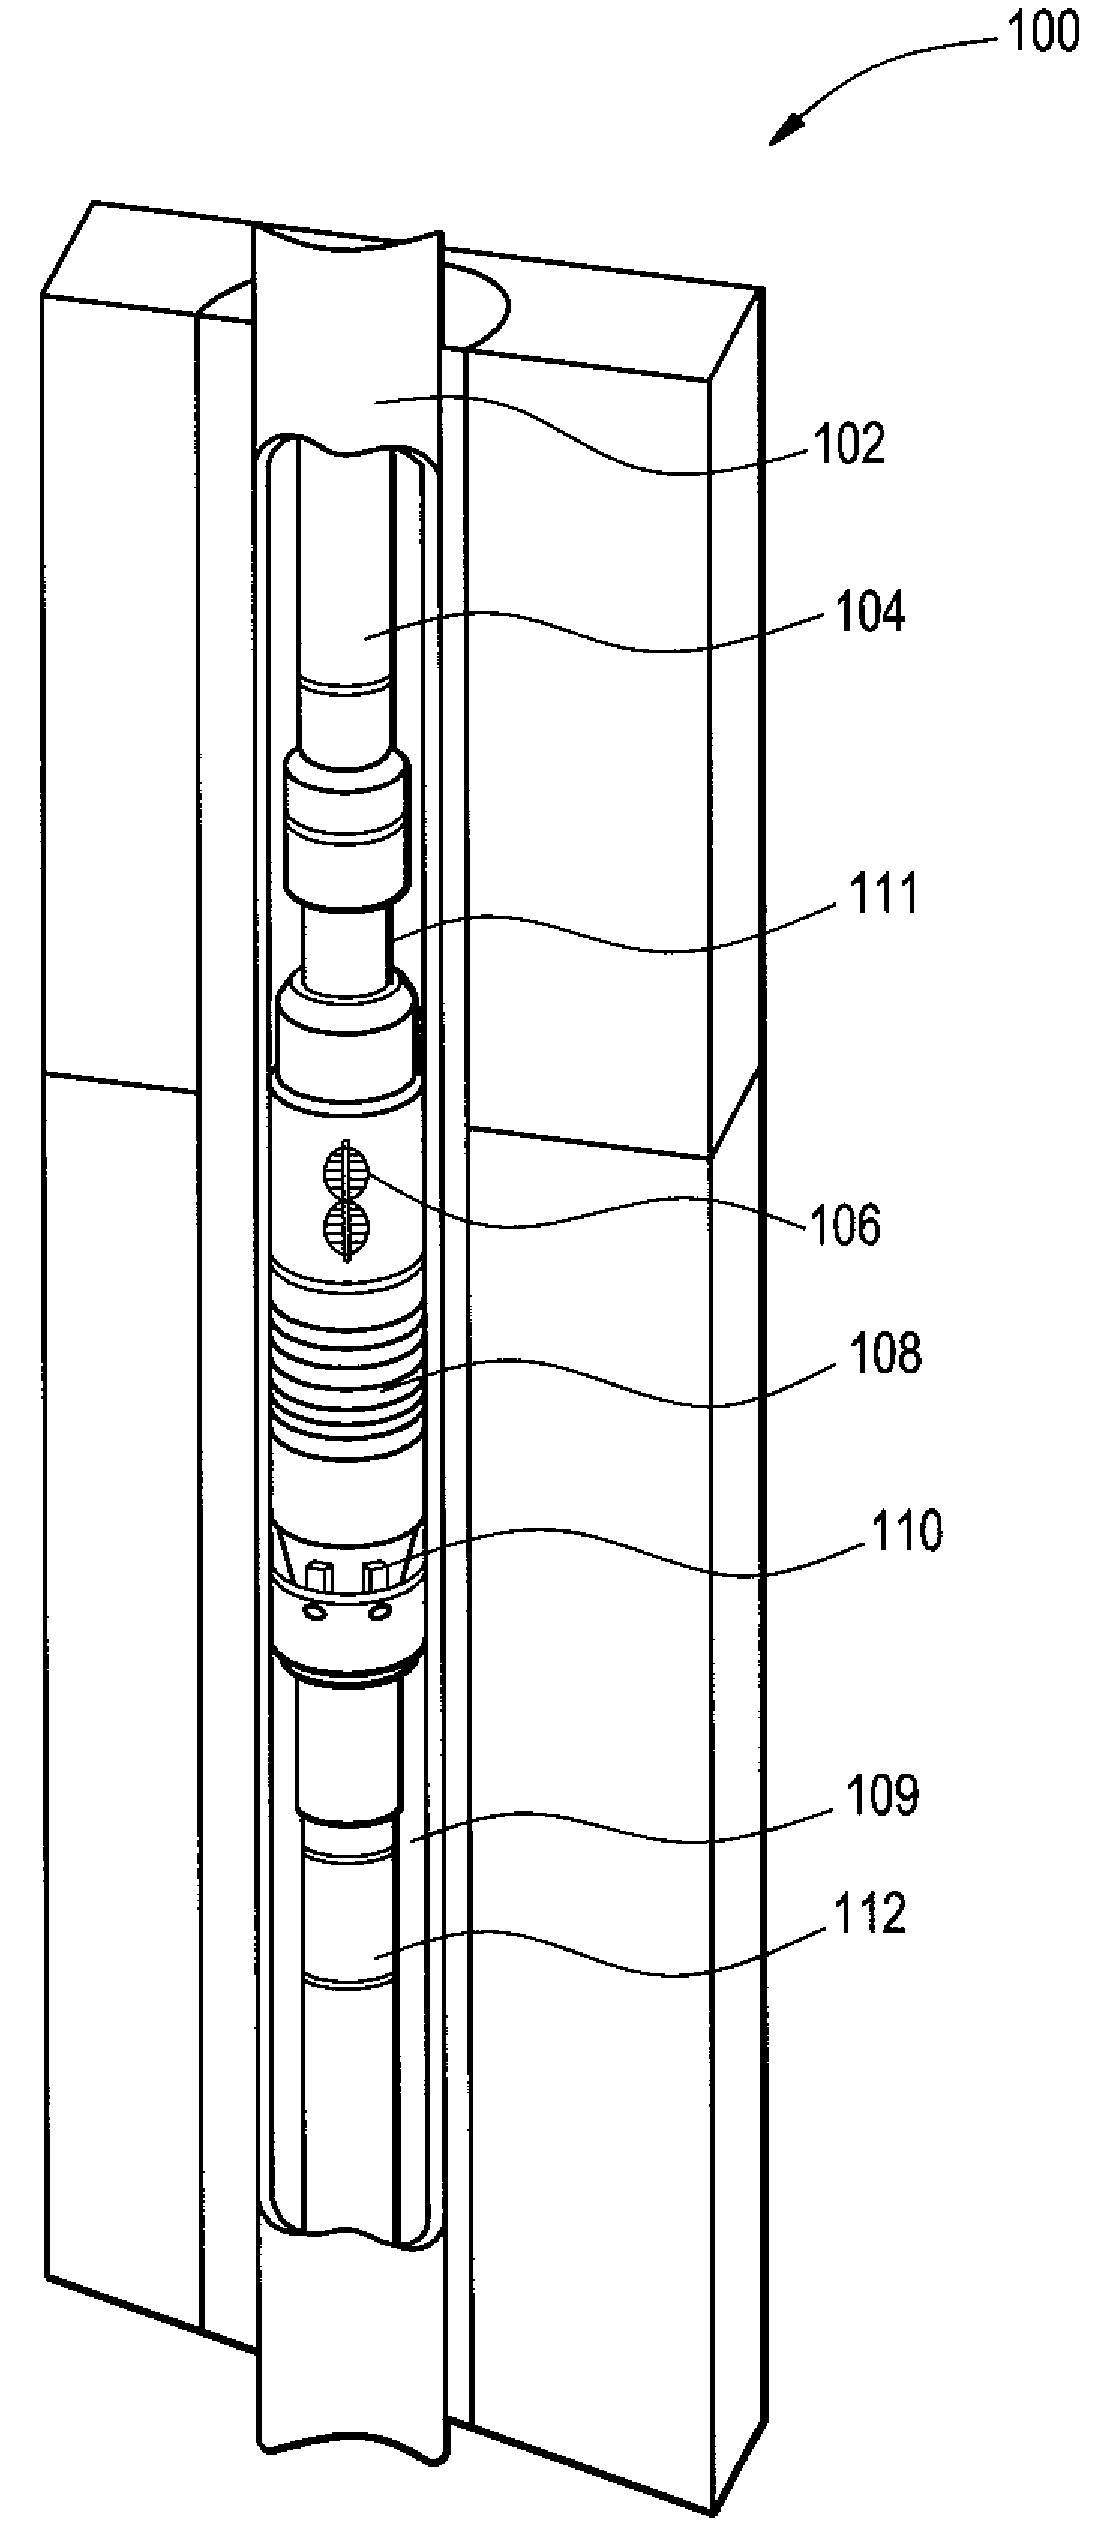 Oilfield apparatus comprising swellable elastomers having nanosensors therein and methods of using same in oilfield application